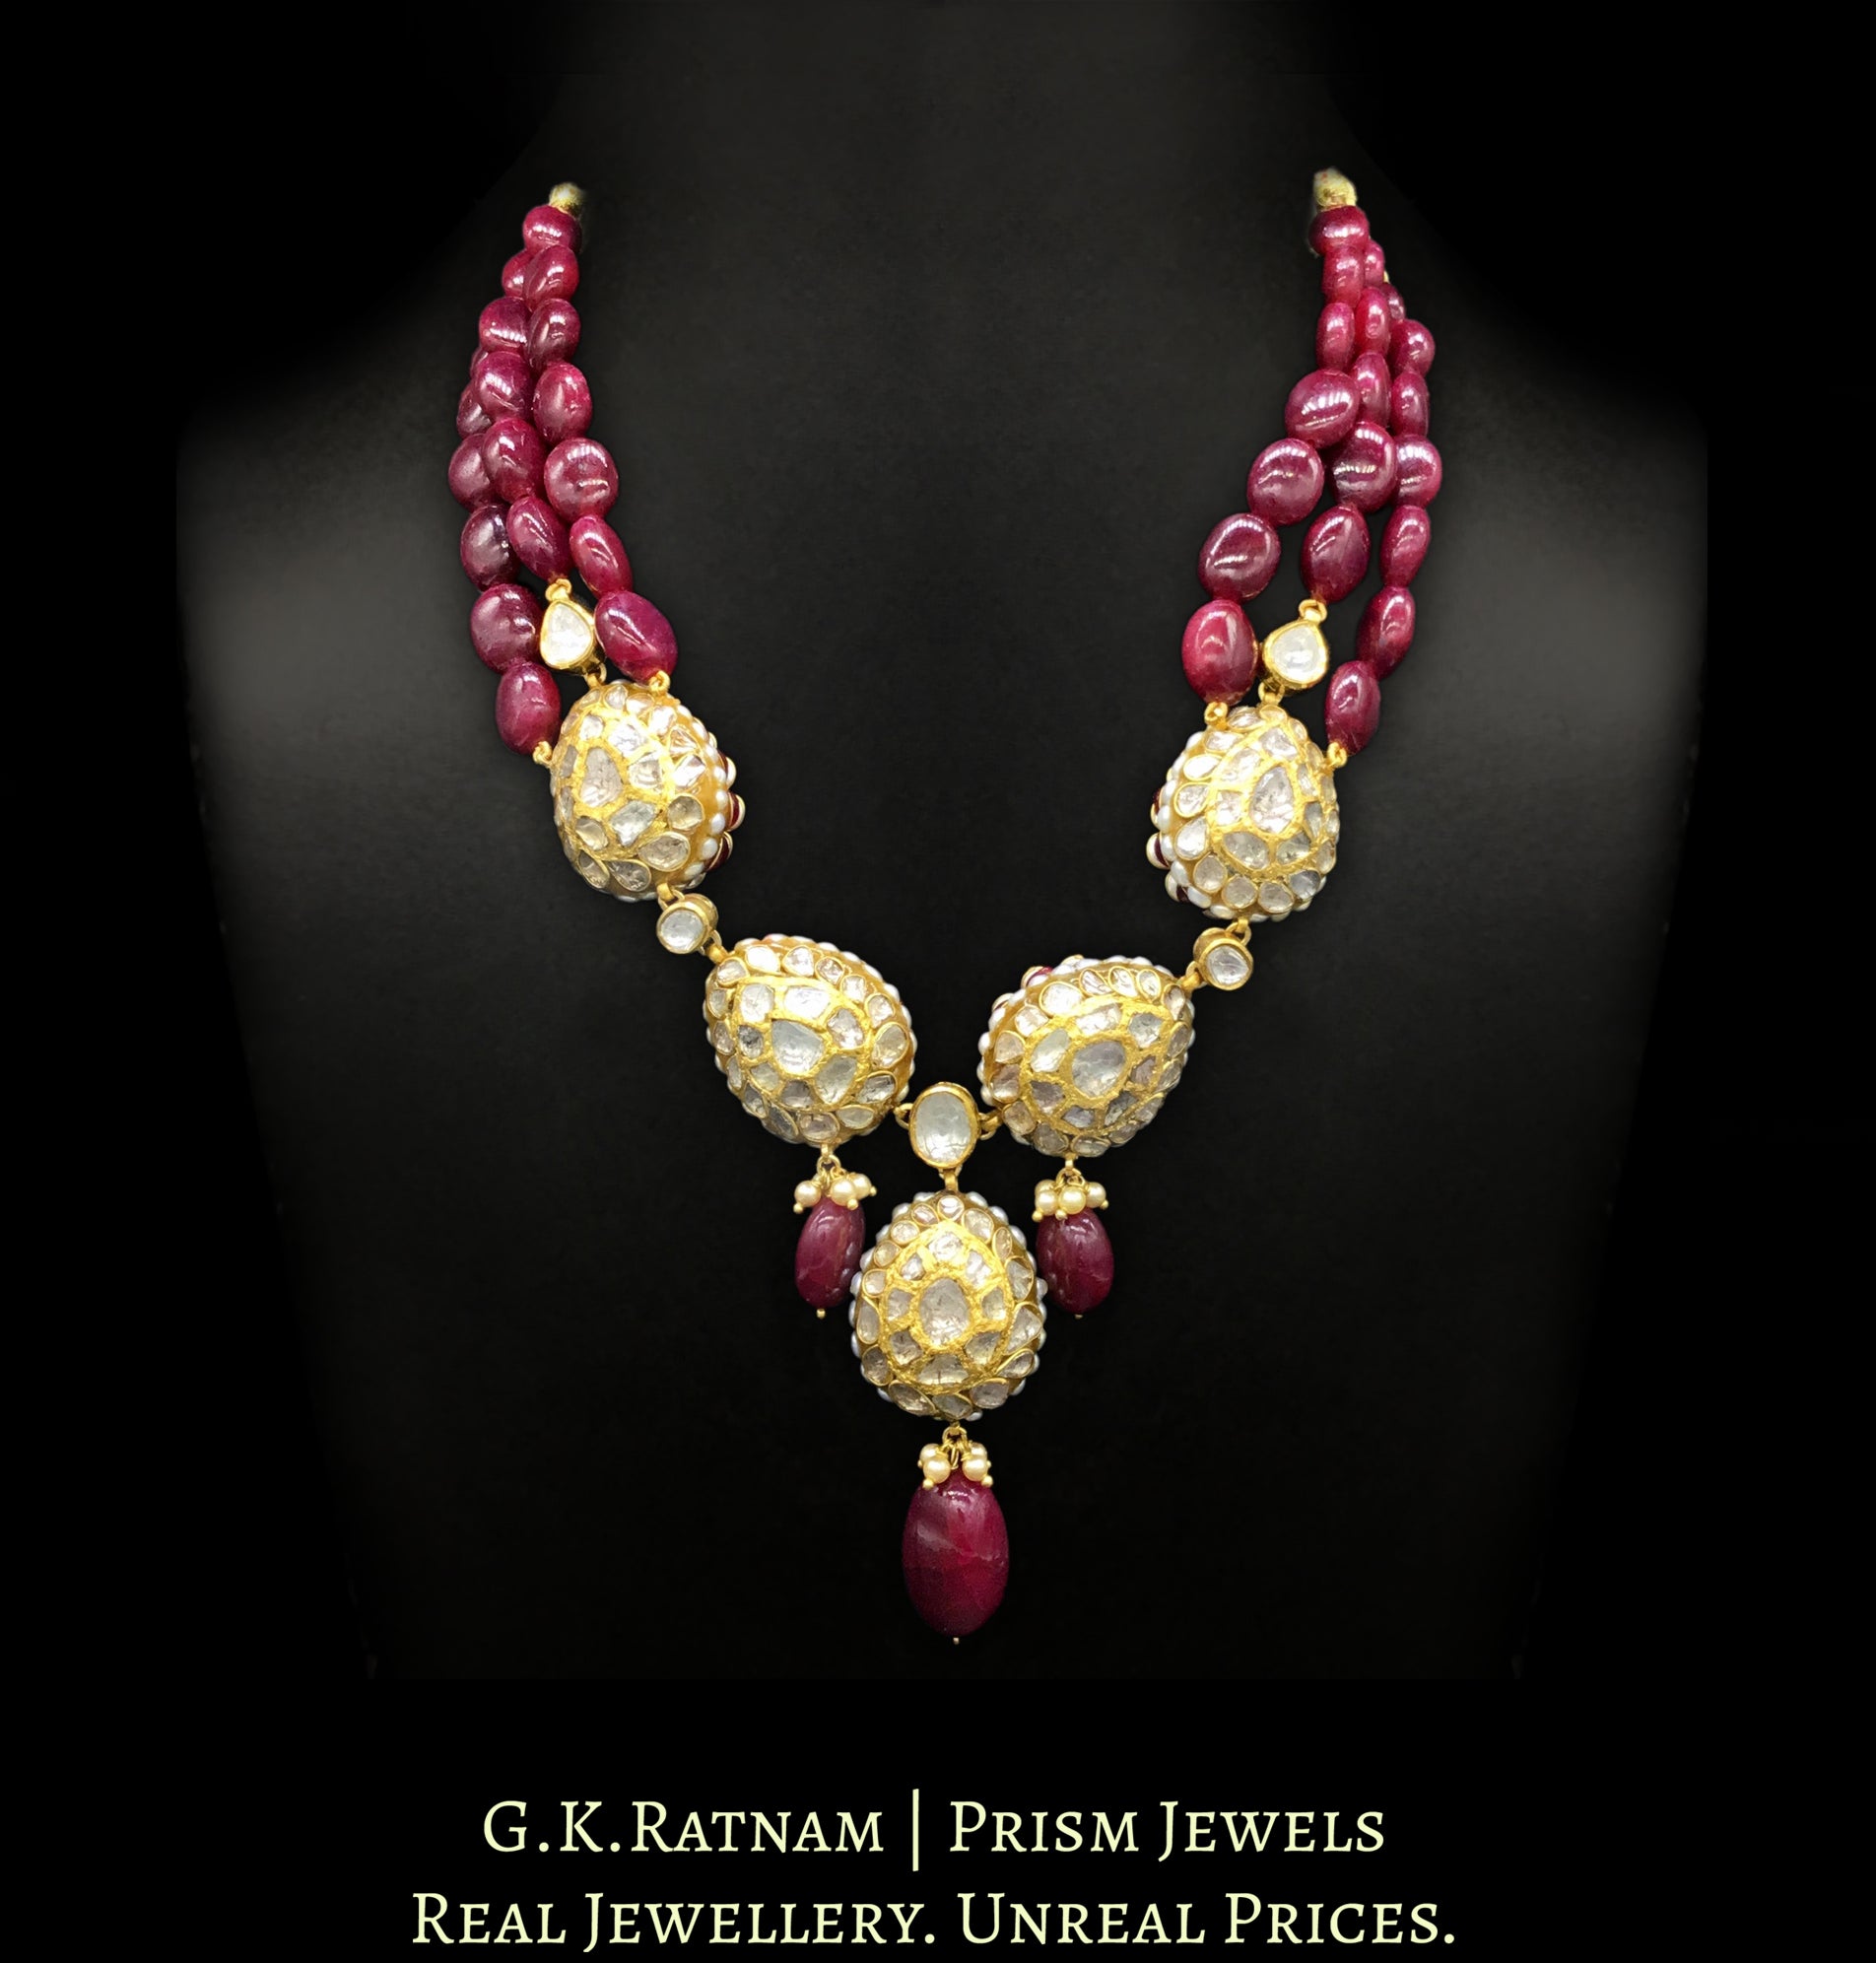 23k Gold and Diamond Polki pacchi hybrid Necklace with rubies